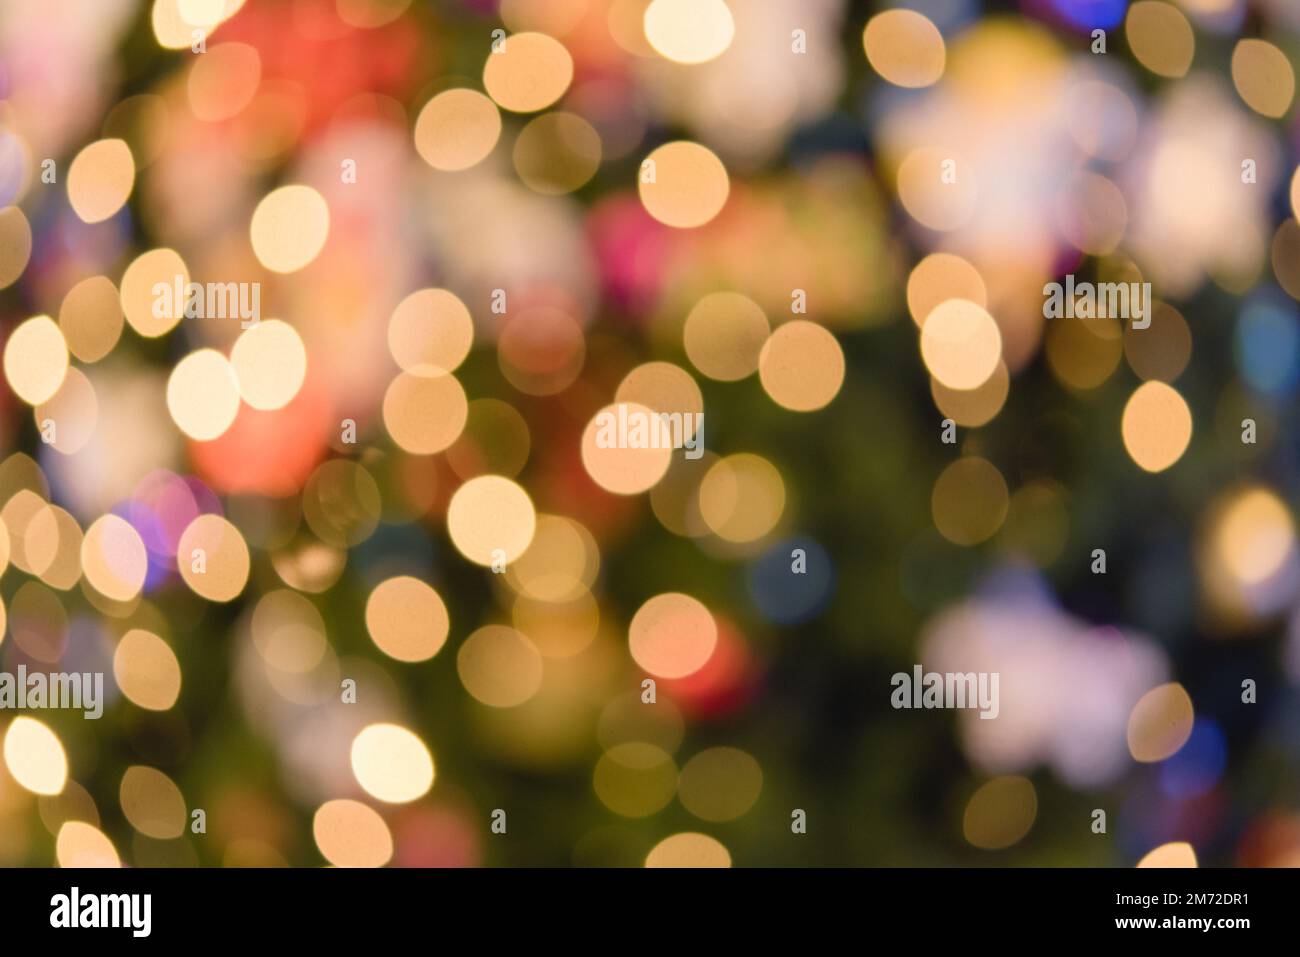 Abstract beautiful blurred bokeh background with copy space. blur bokeh light background festive colorful banner concept. Stock Photo